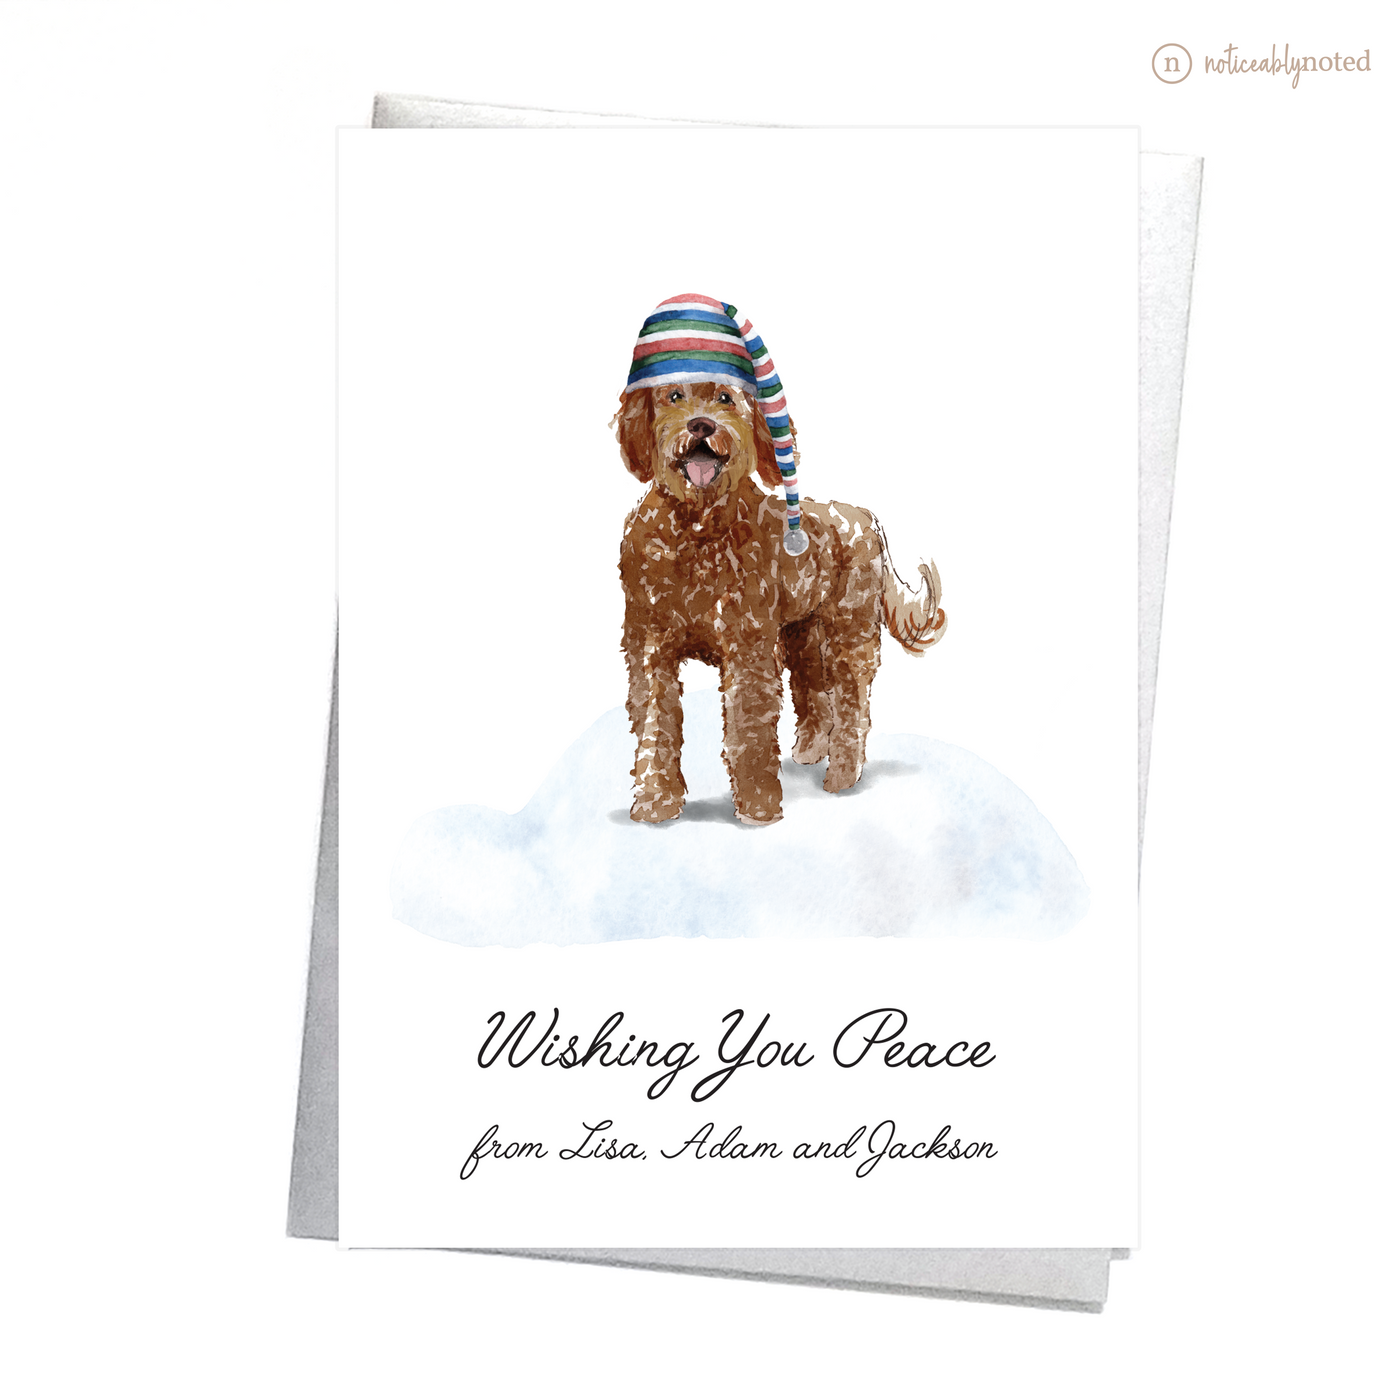 Labradoodle Dog Christmas Card | Noticeably Noted